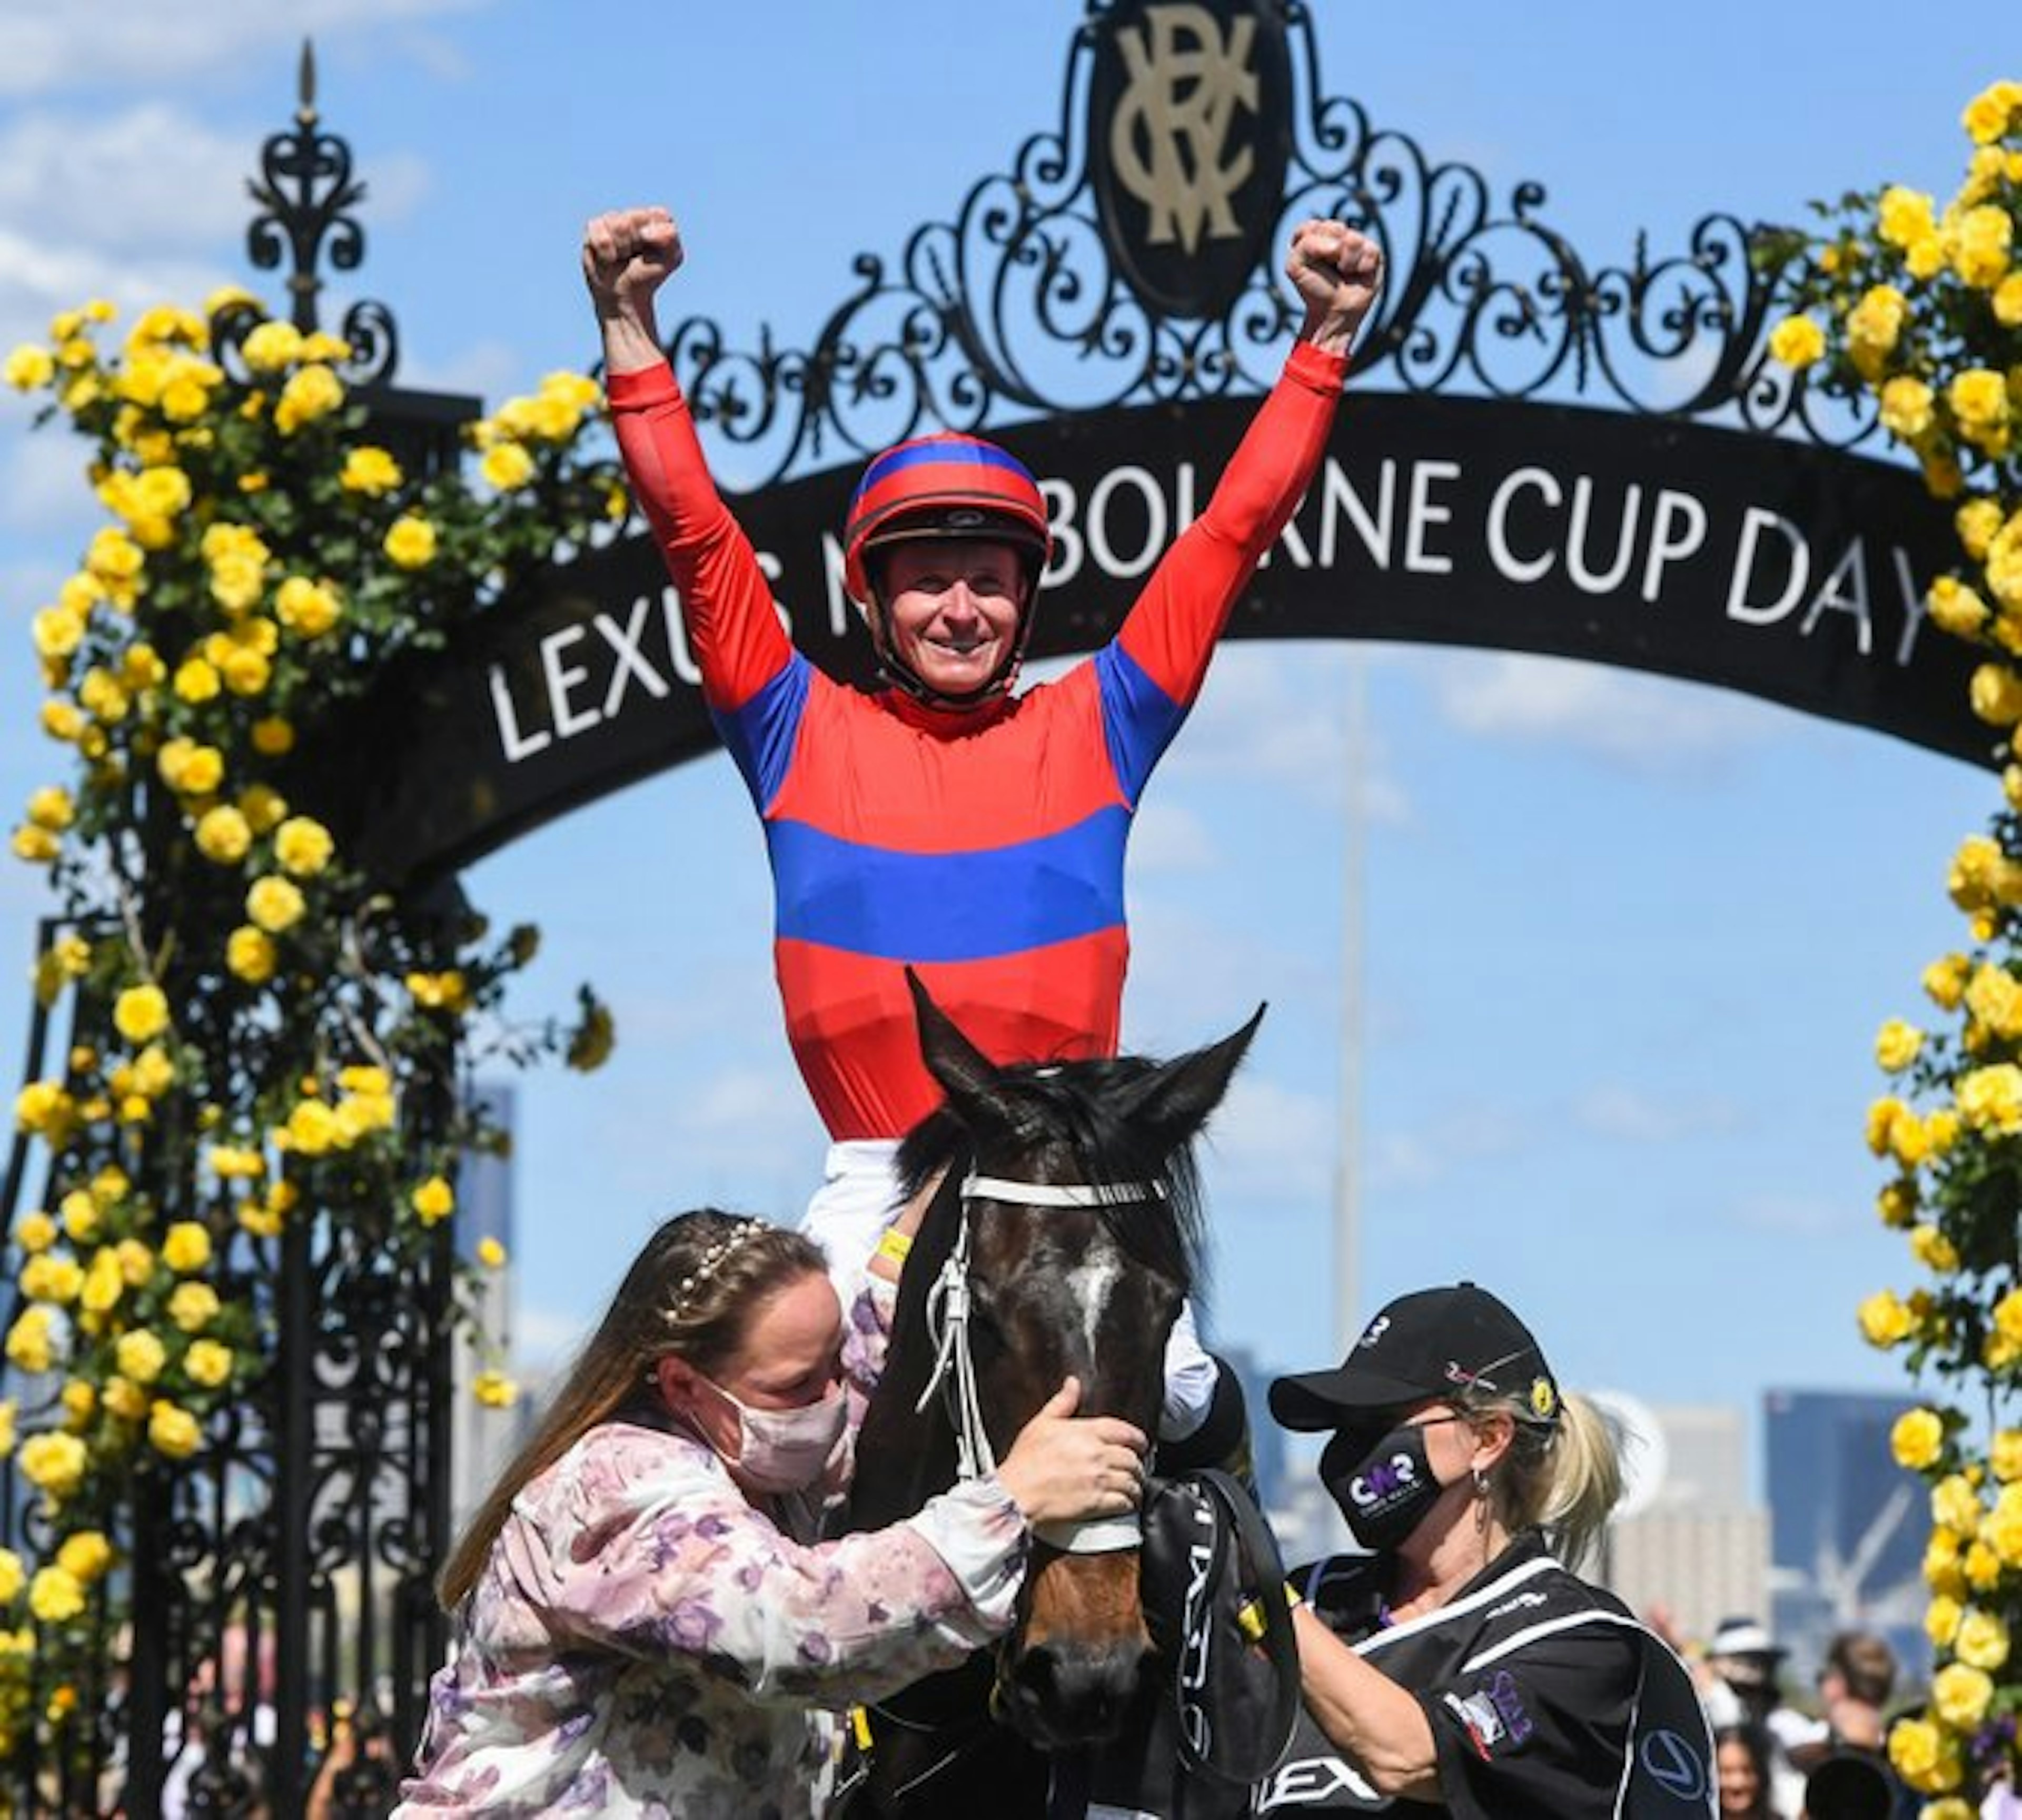 The Melbourne Cup - a celebration of Champions 